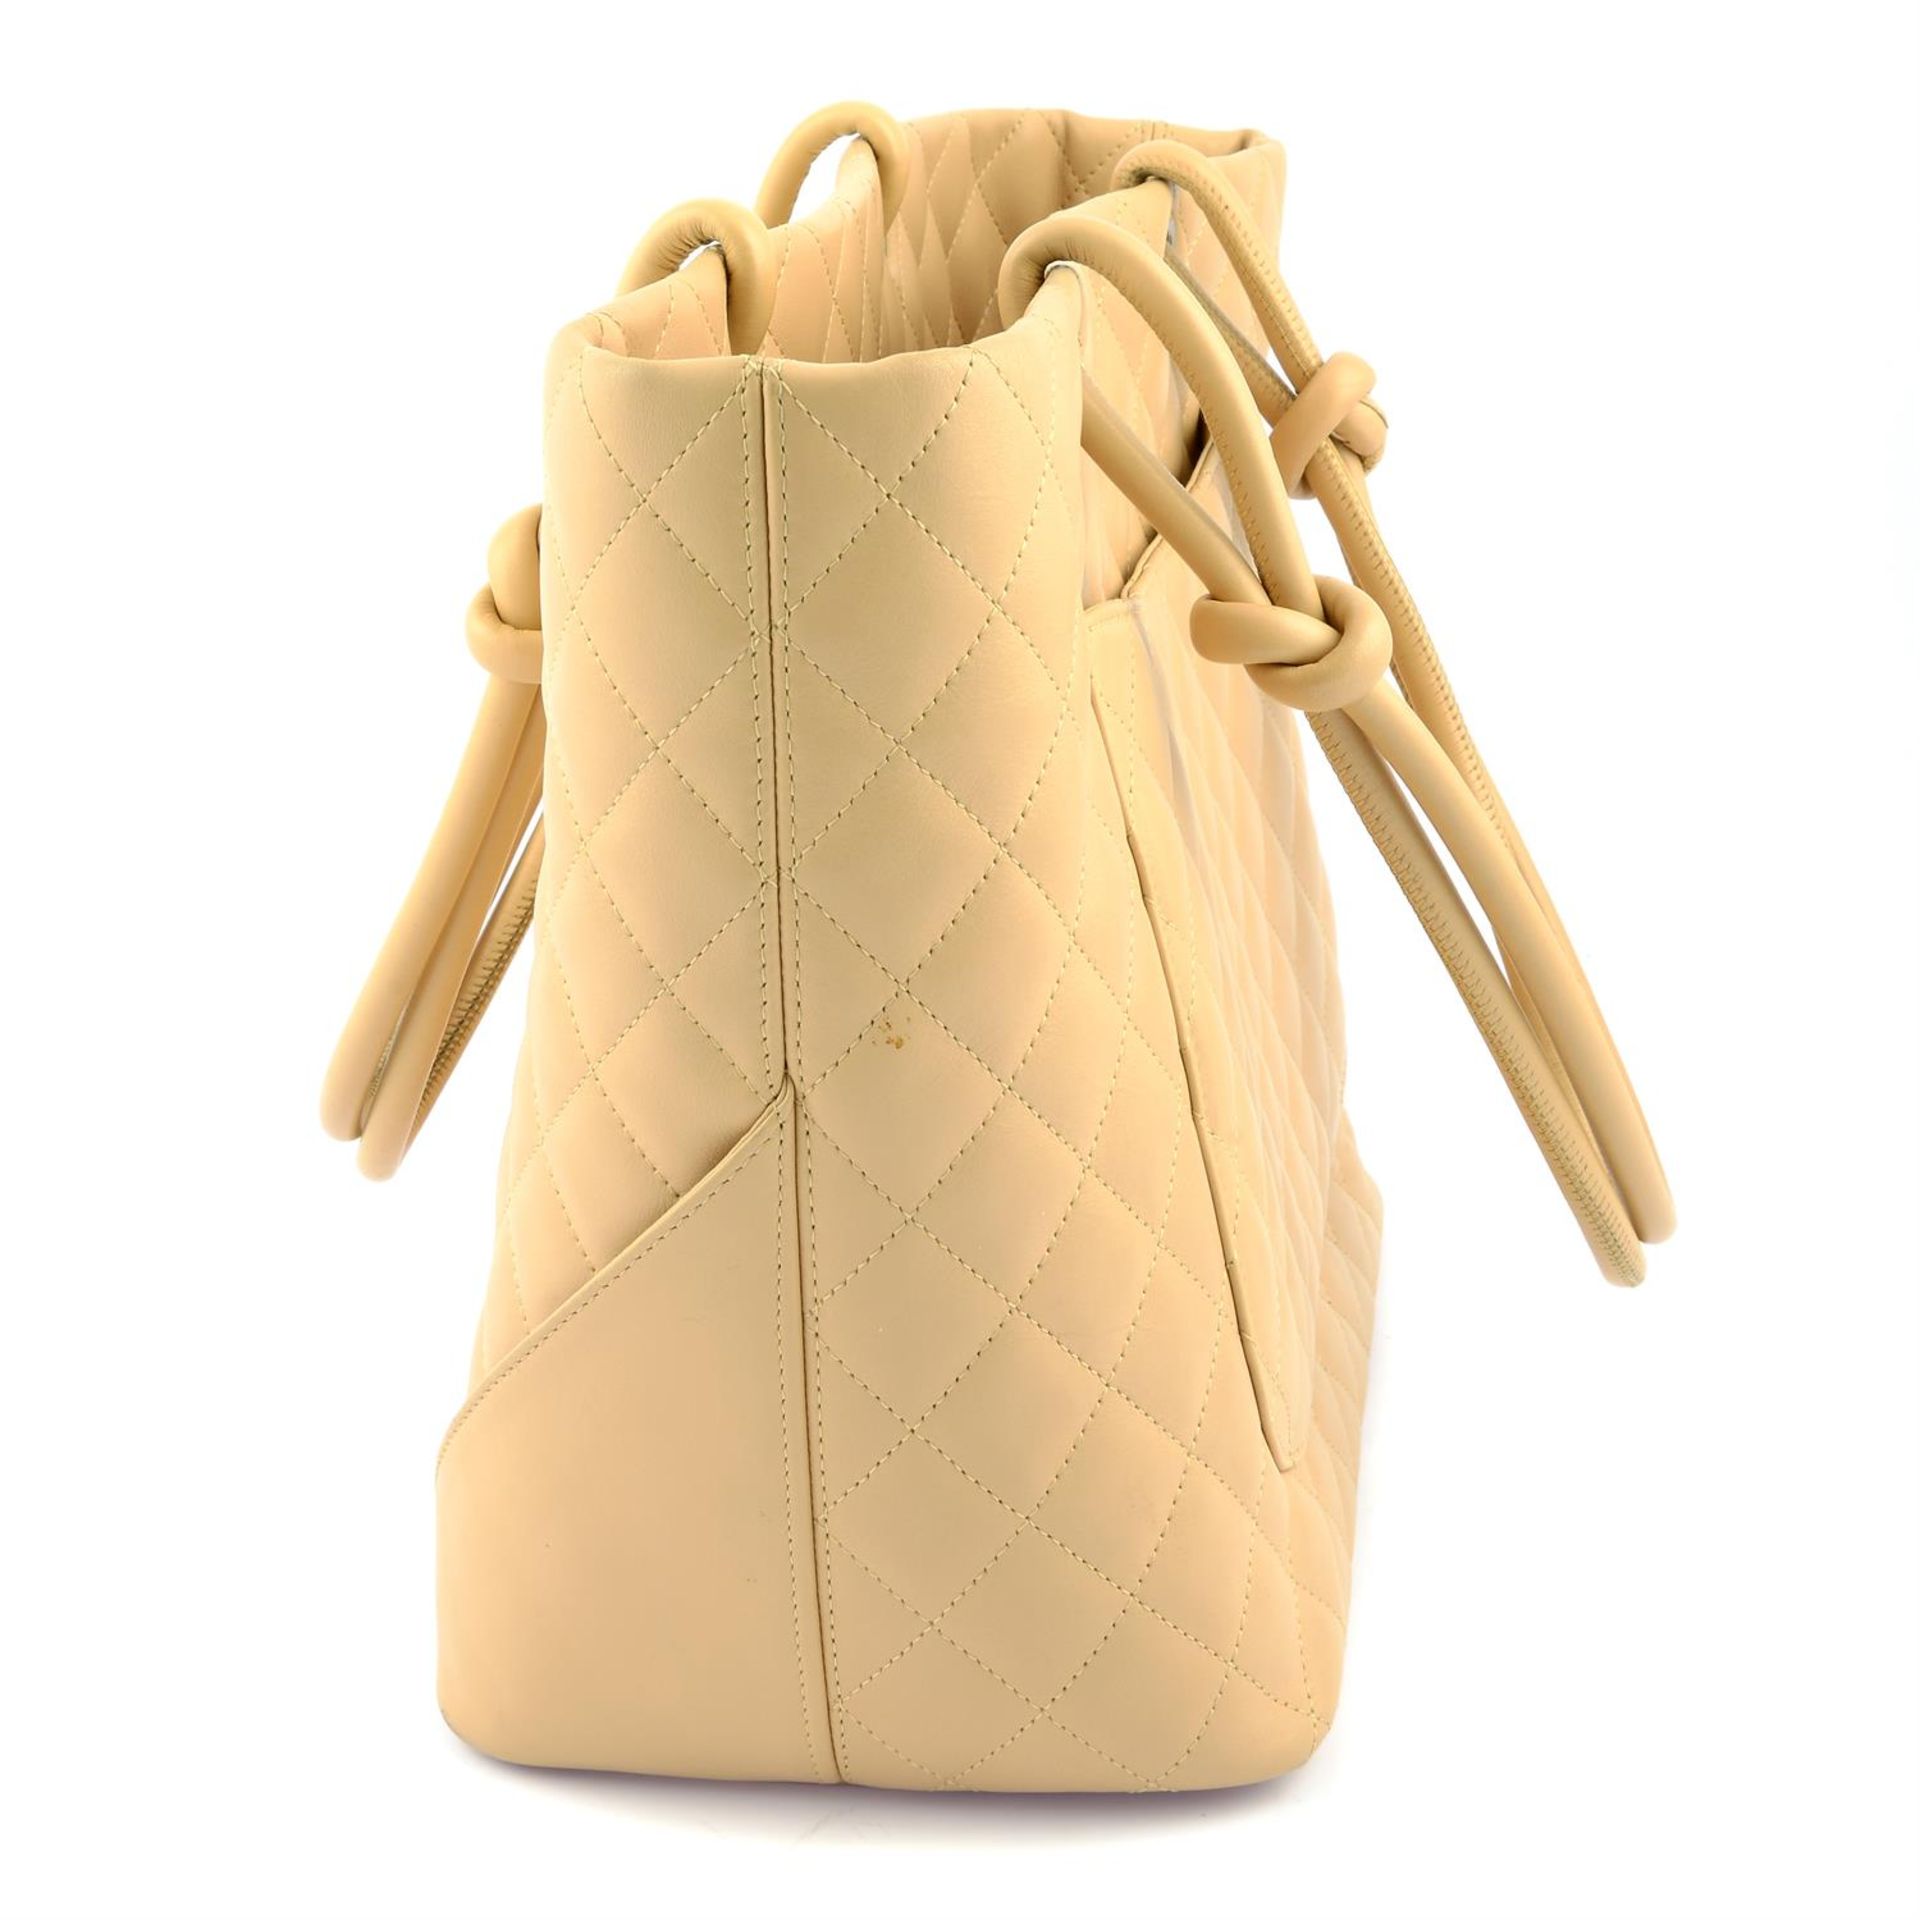 CHANEL - a beige CC Cambon leather tote bag. - Image 3 of 5